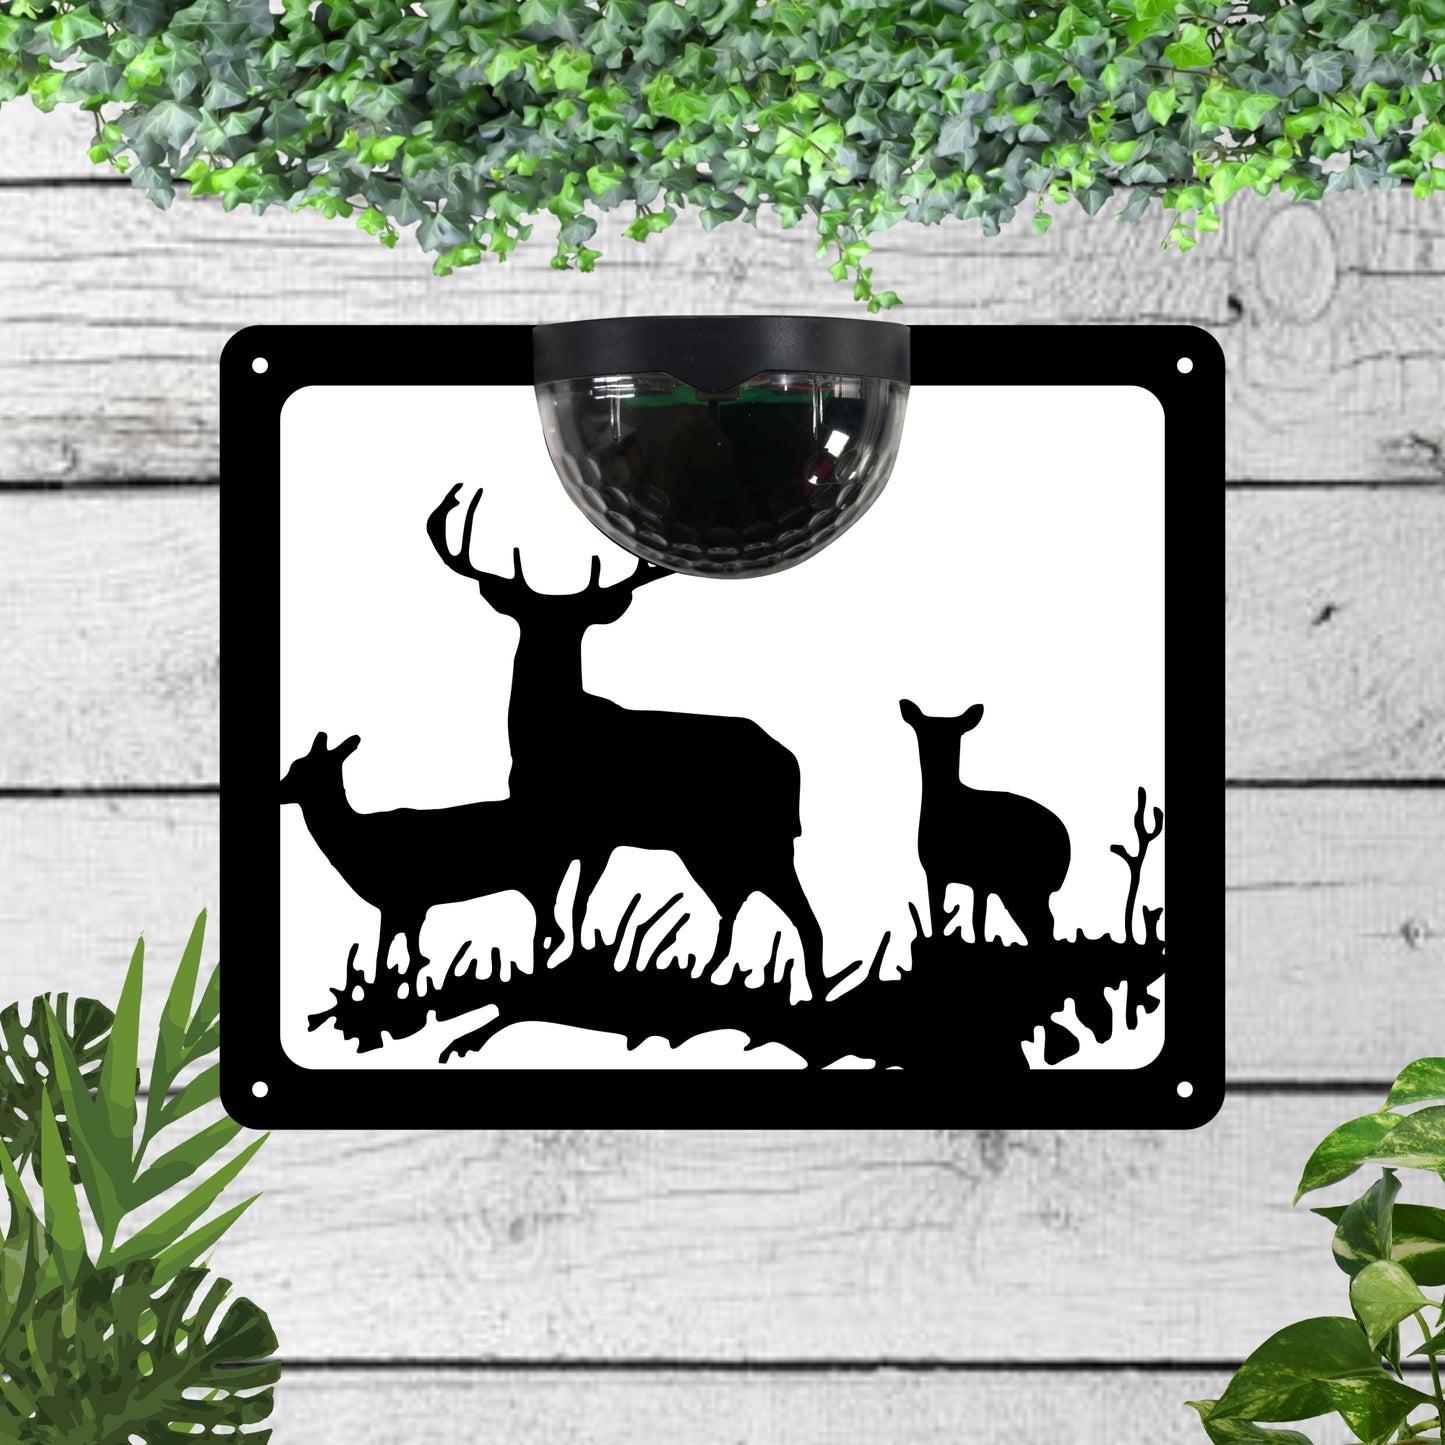 Garden Solar Light Wall Plaque Featuring a Stag And Two Does | John Alans